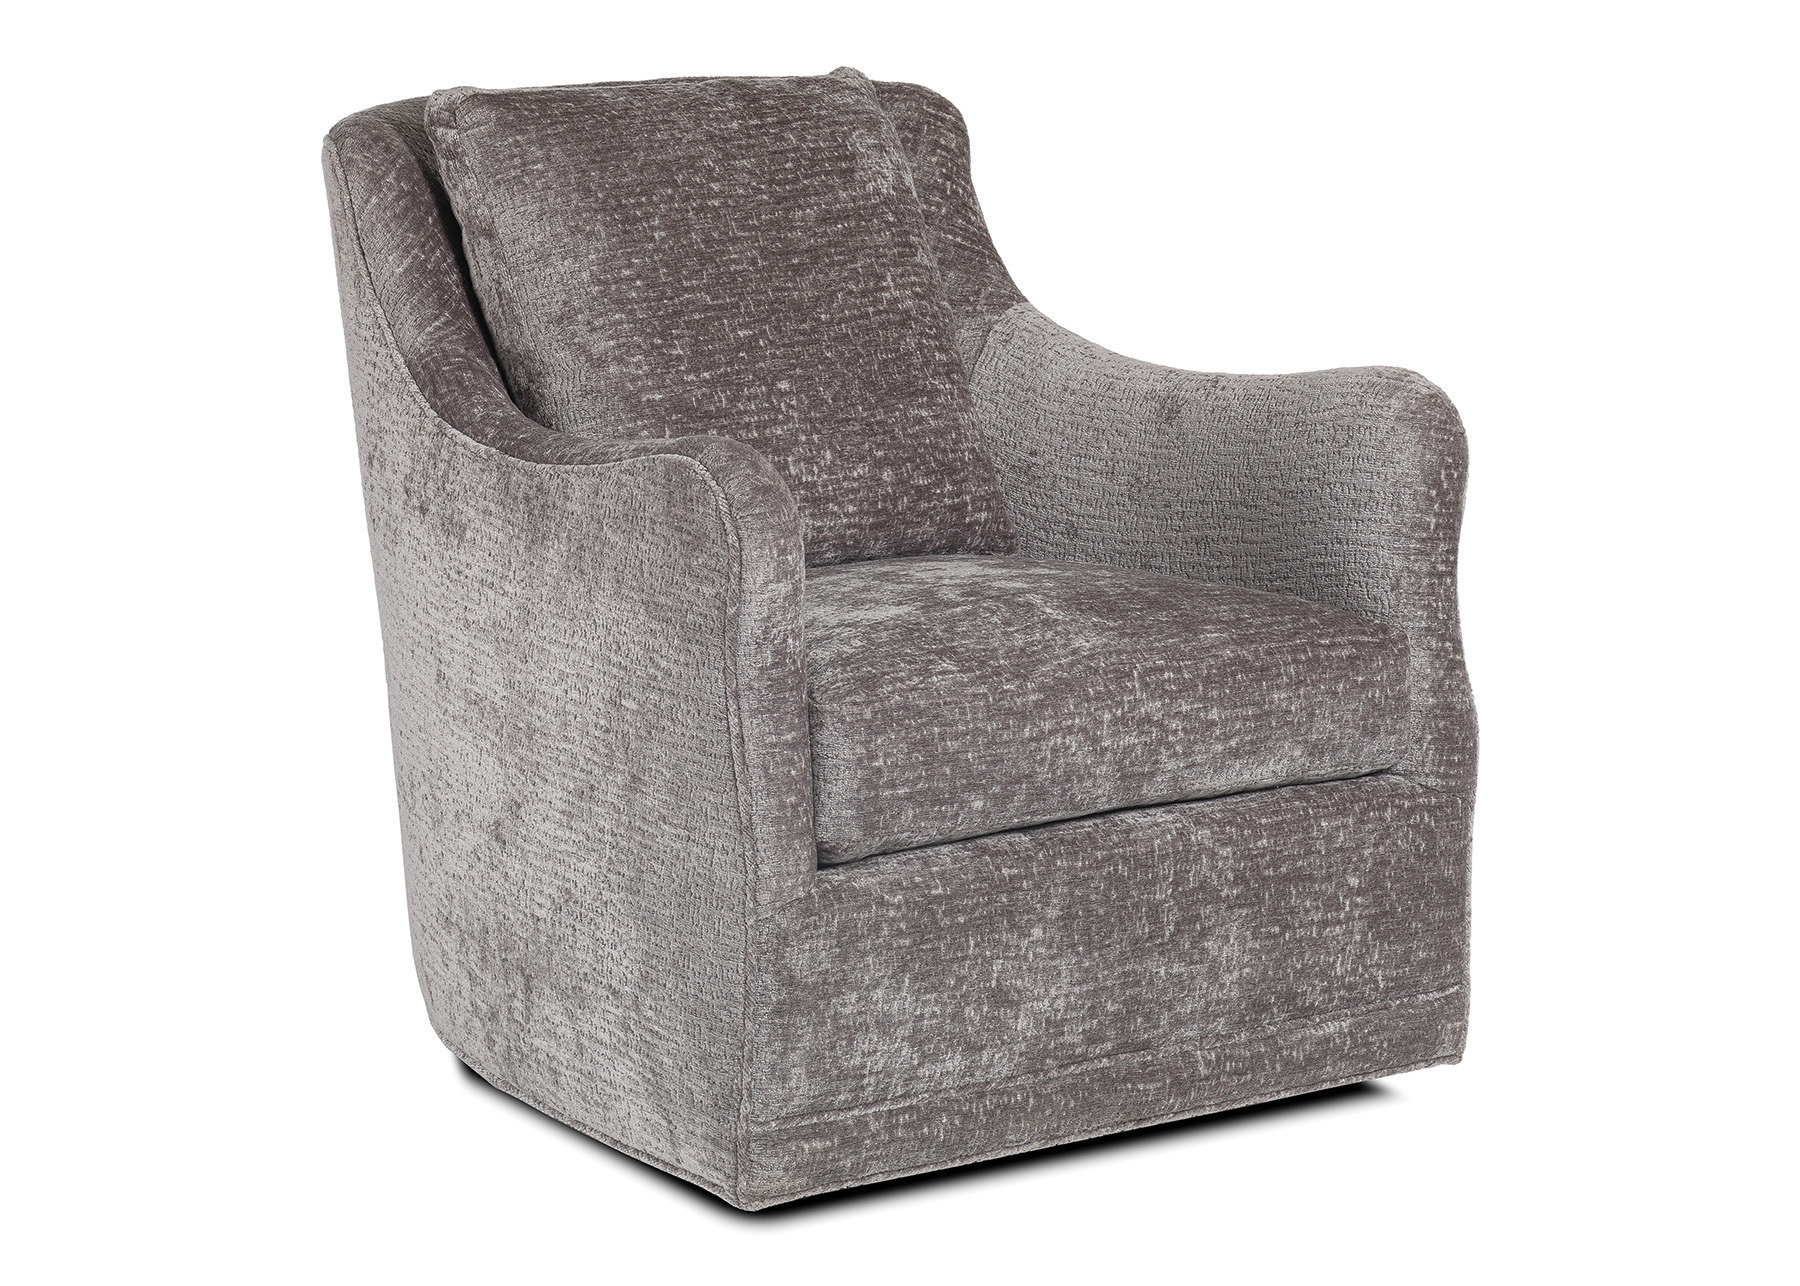 Jessica Charles 5478-S-S Arcadia Sculpted Arm Swivel Chair